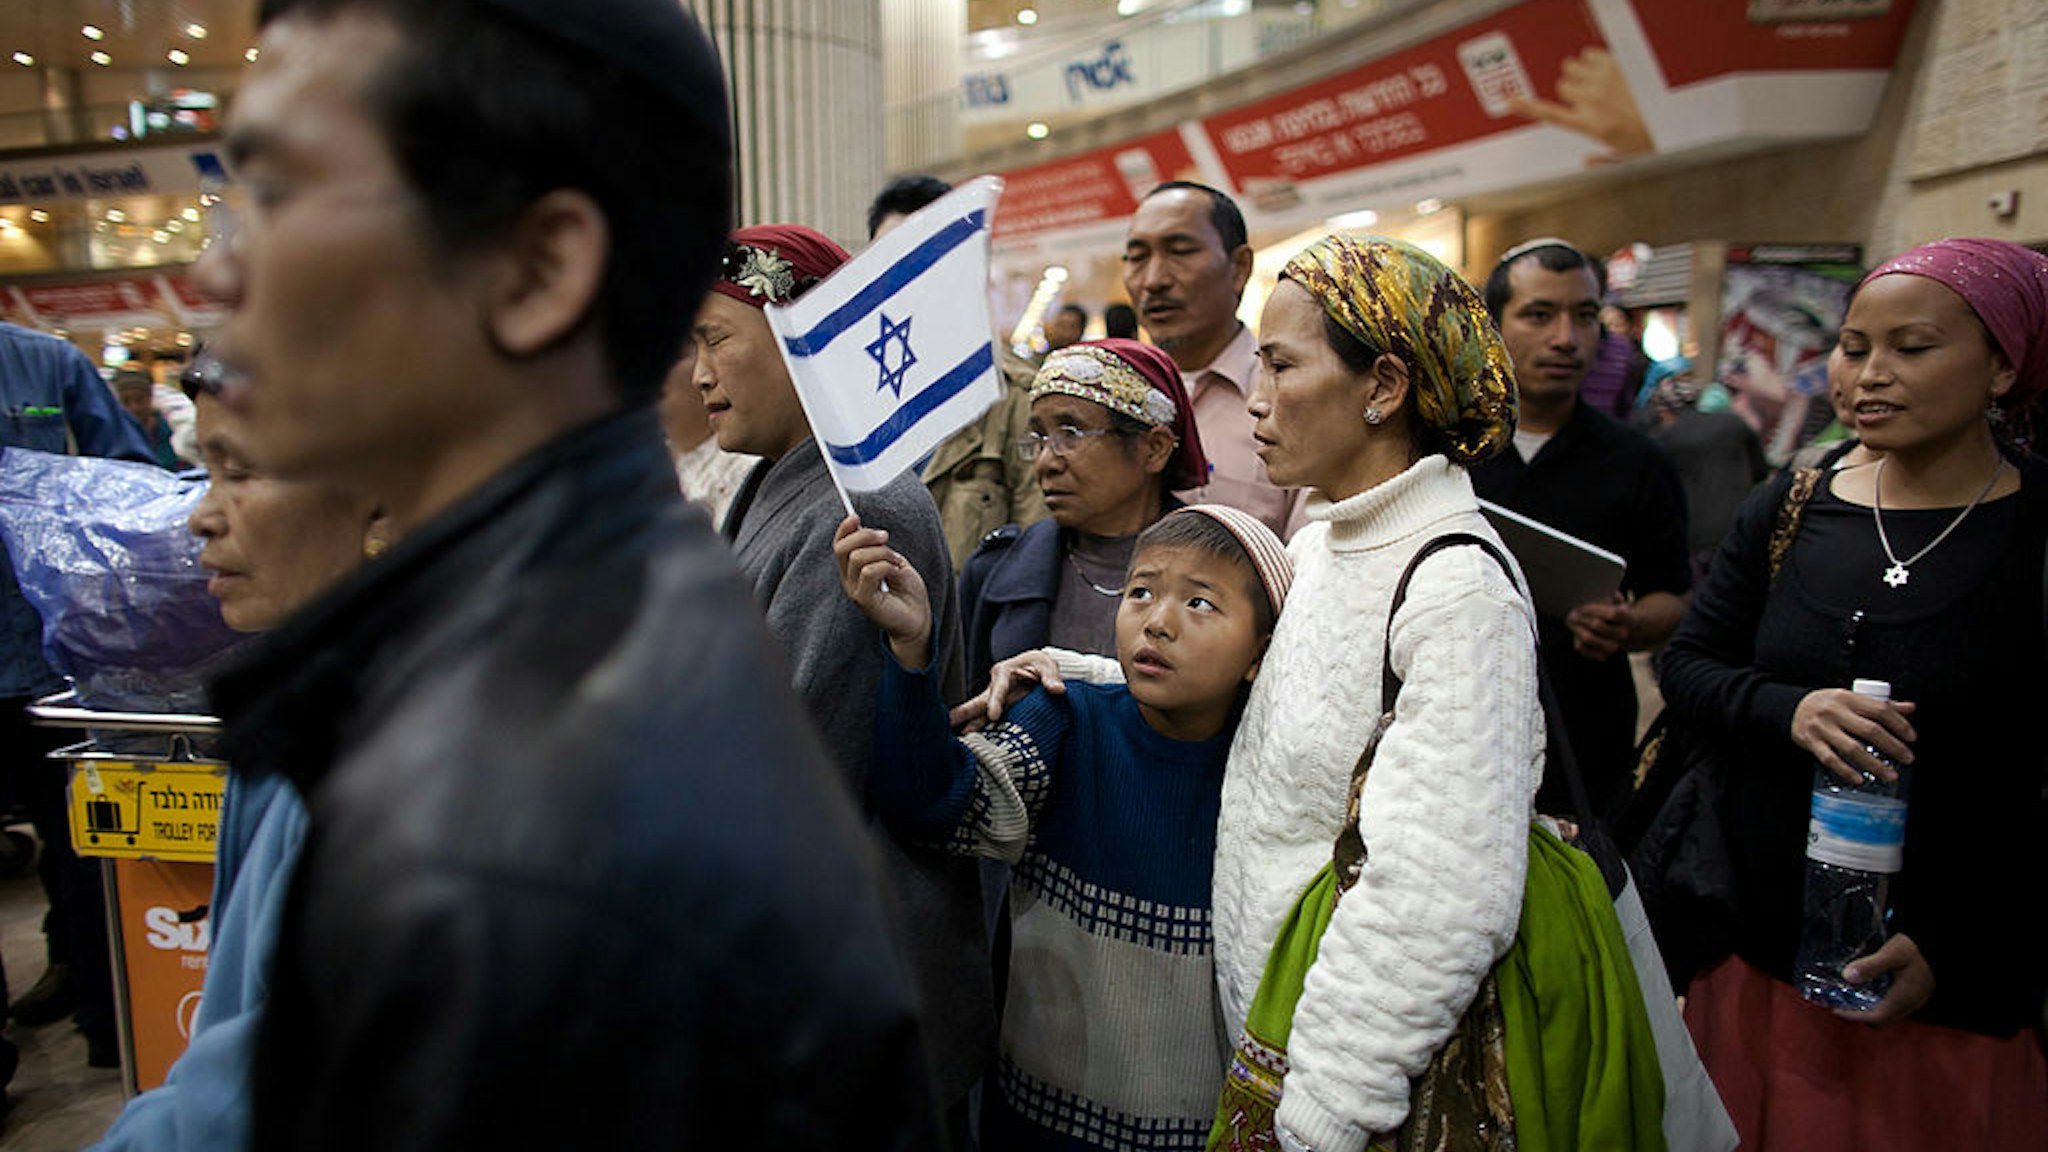 Jewish immigrants of the Bnei Menashe tribe reunite with relatives at the Ben Gurion airport on December 24, 2012 near Tel Aviv, Israel.